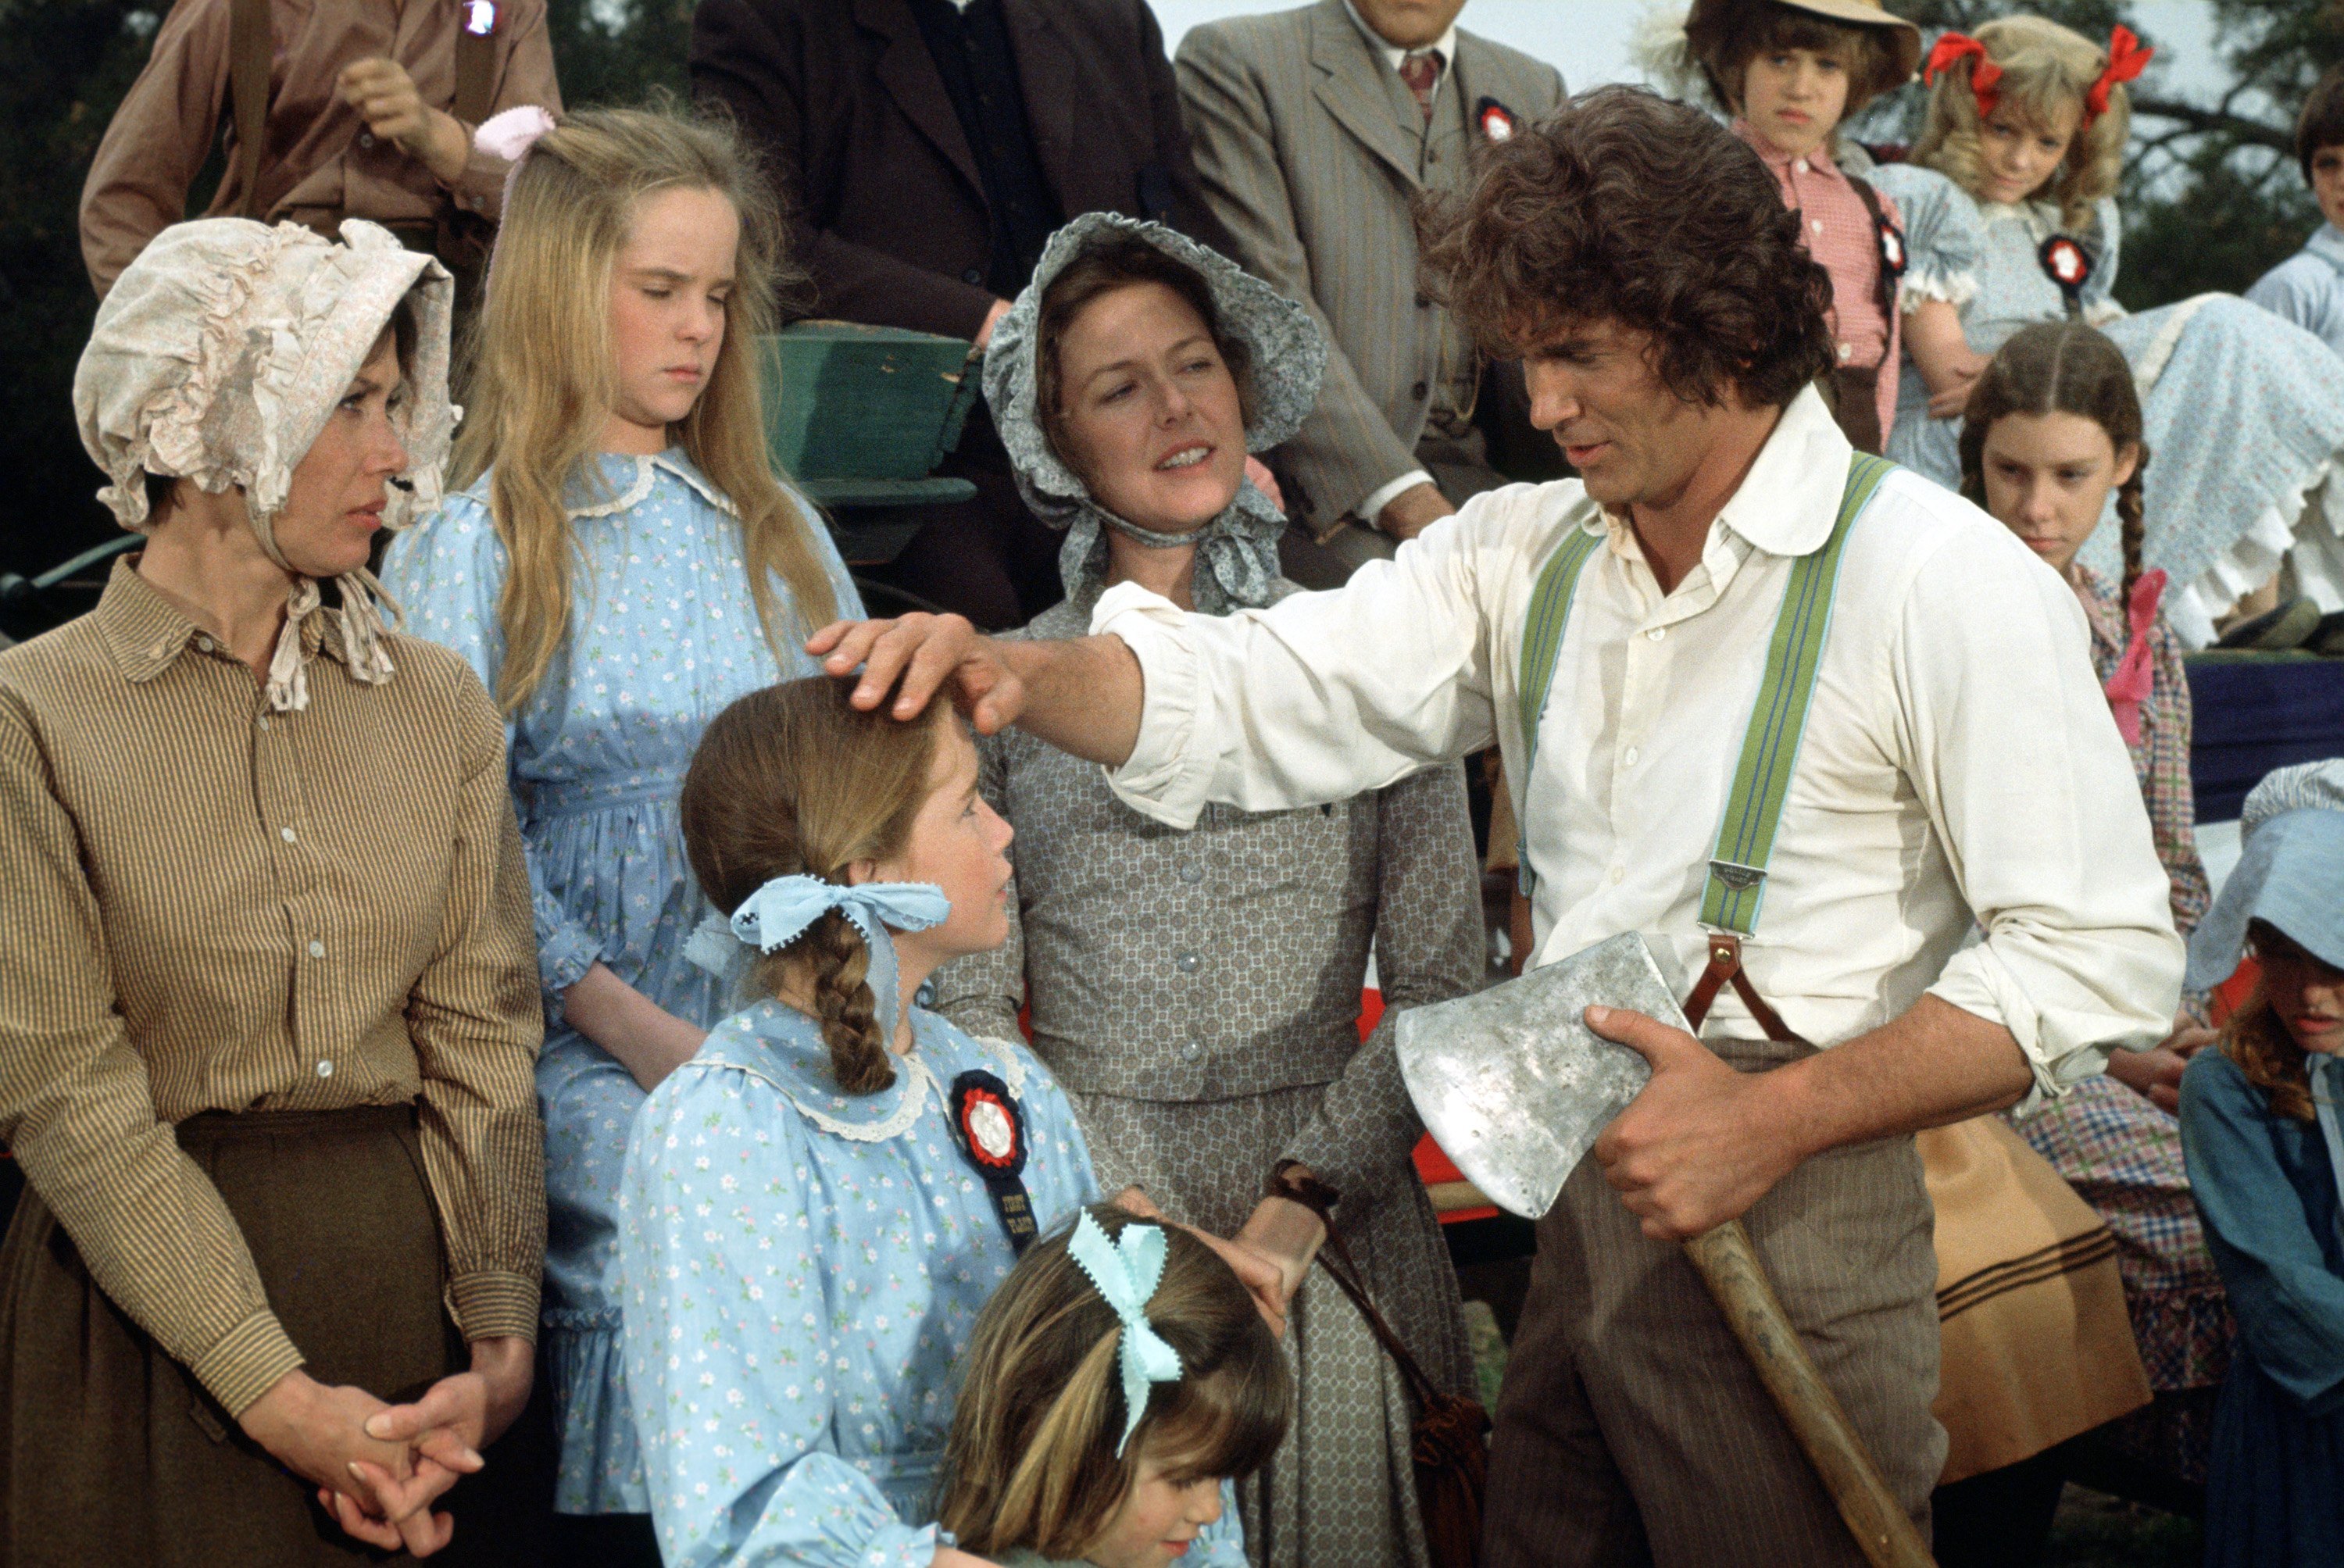 The cast of 'Little House on the Prairie' 1975